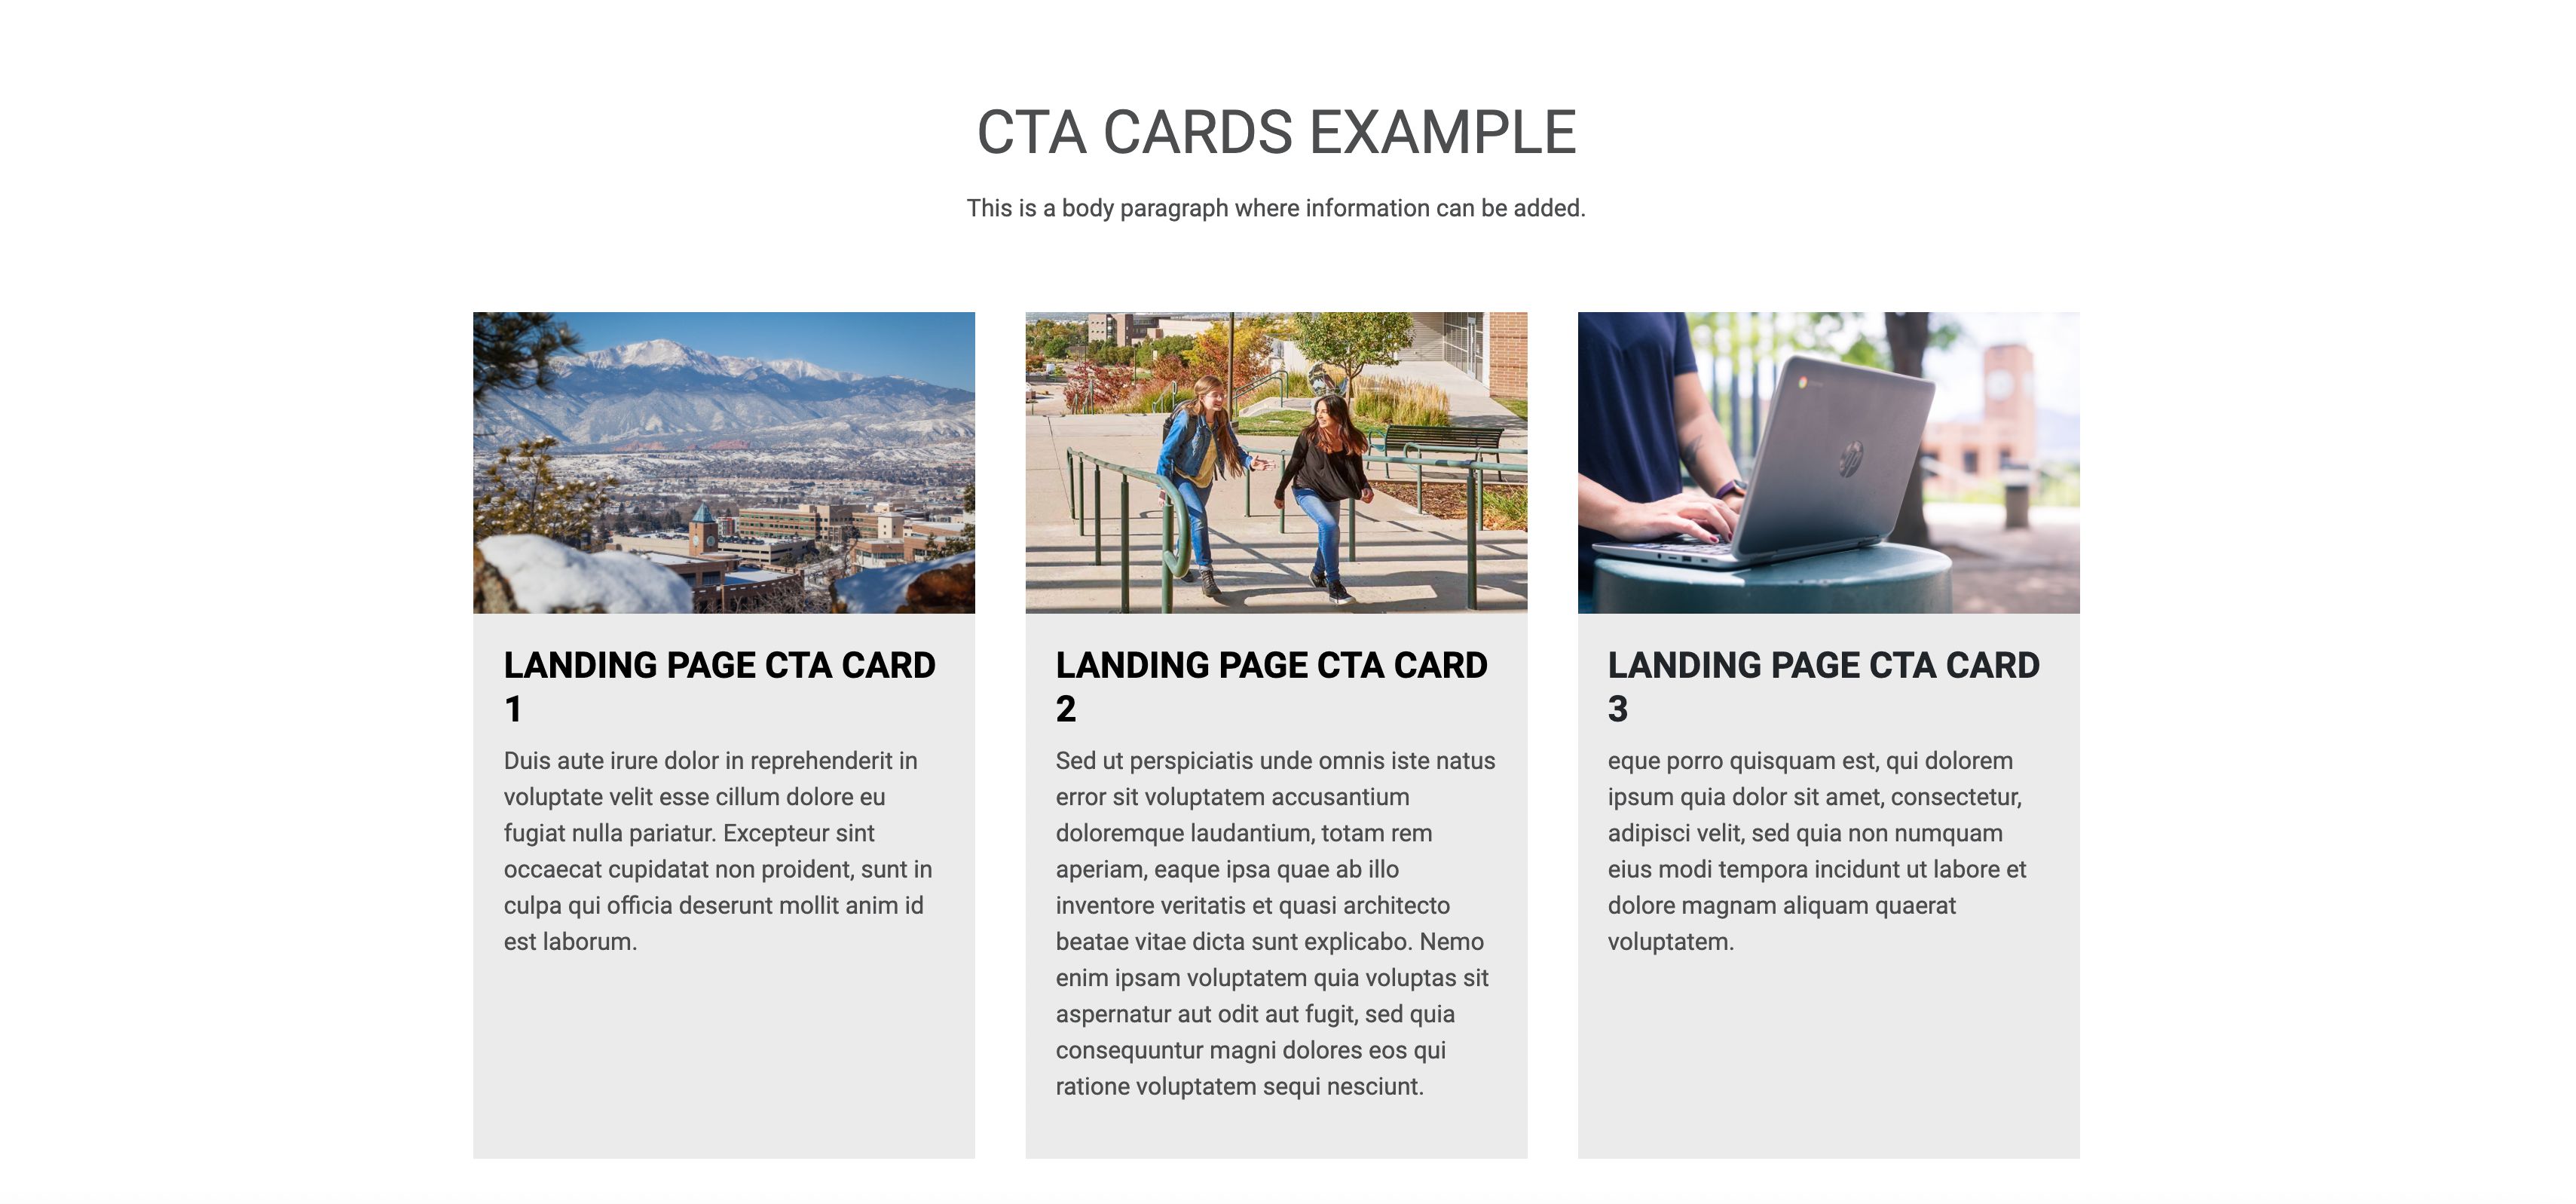 Landing Page - CTA Cards Example